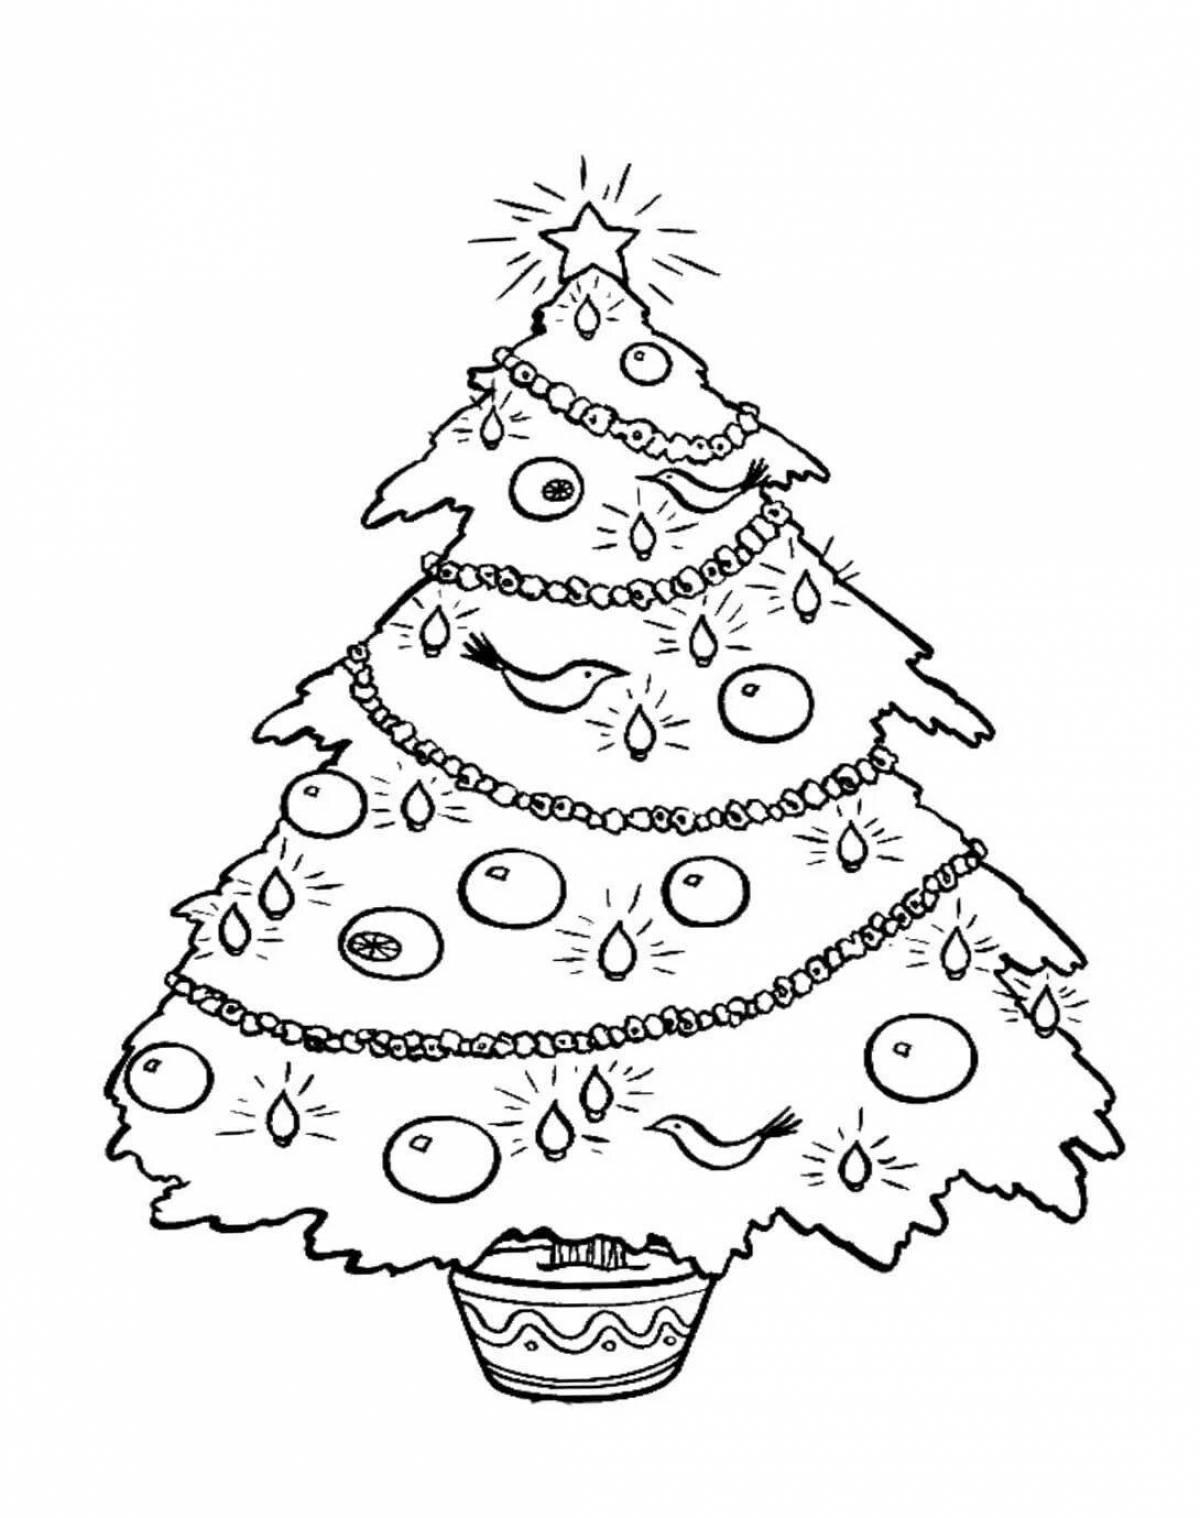 Creative Christmas tree coloring page